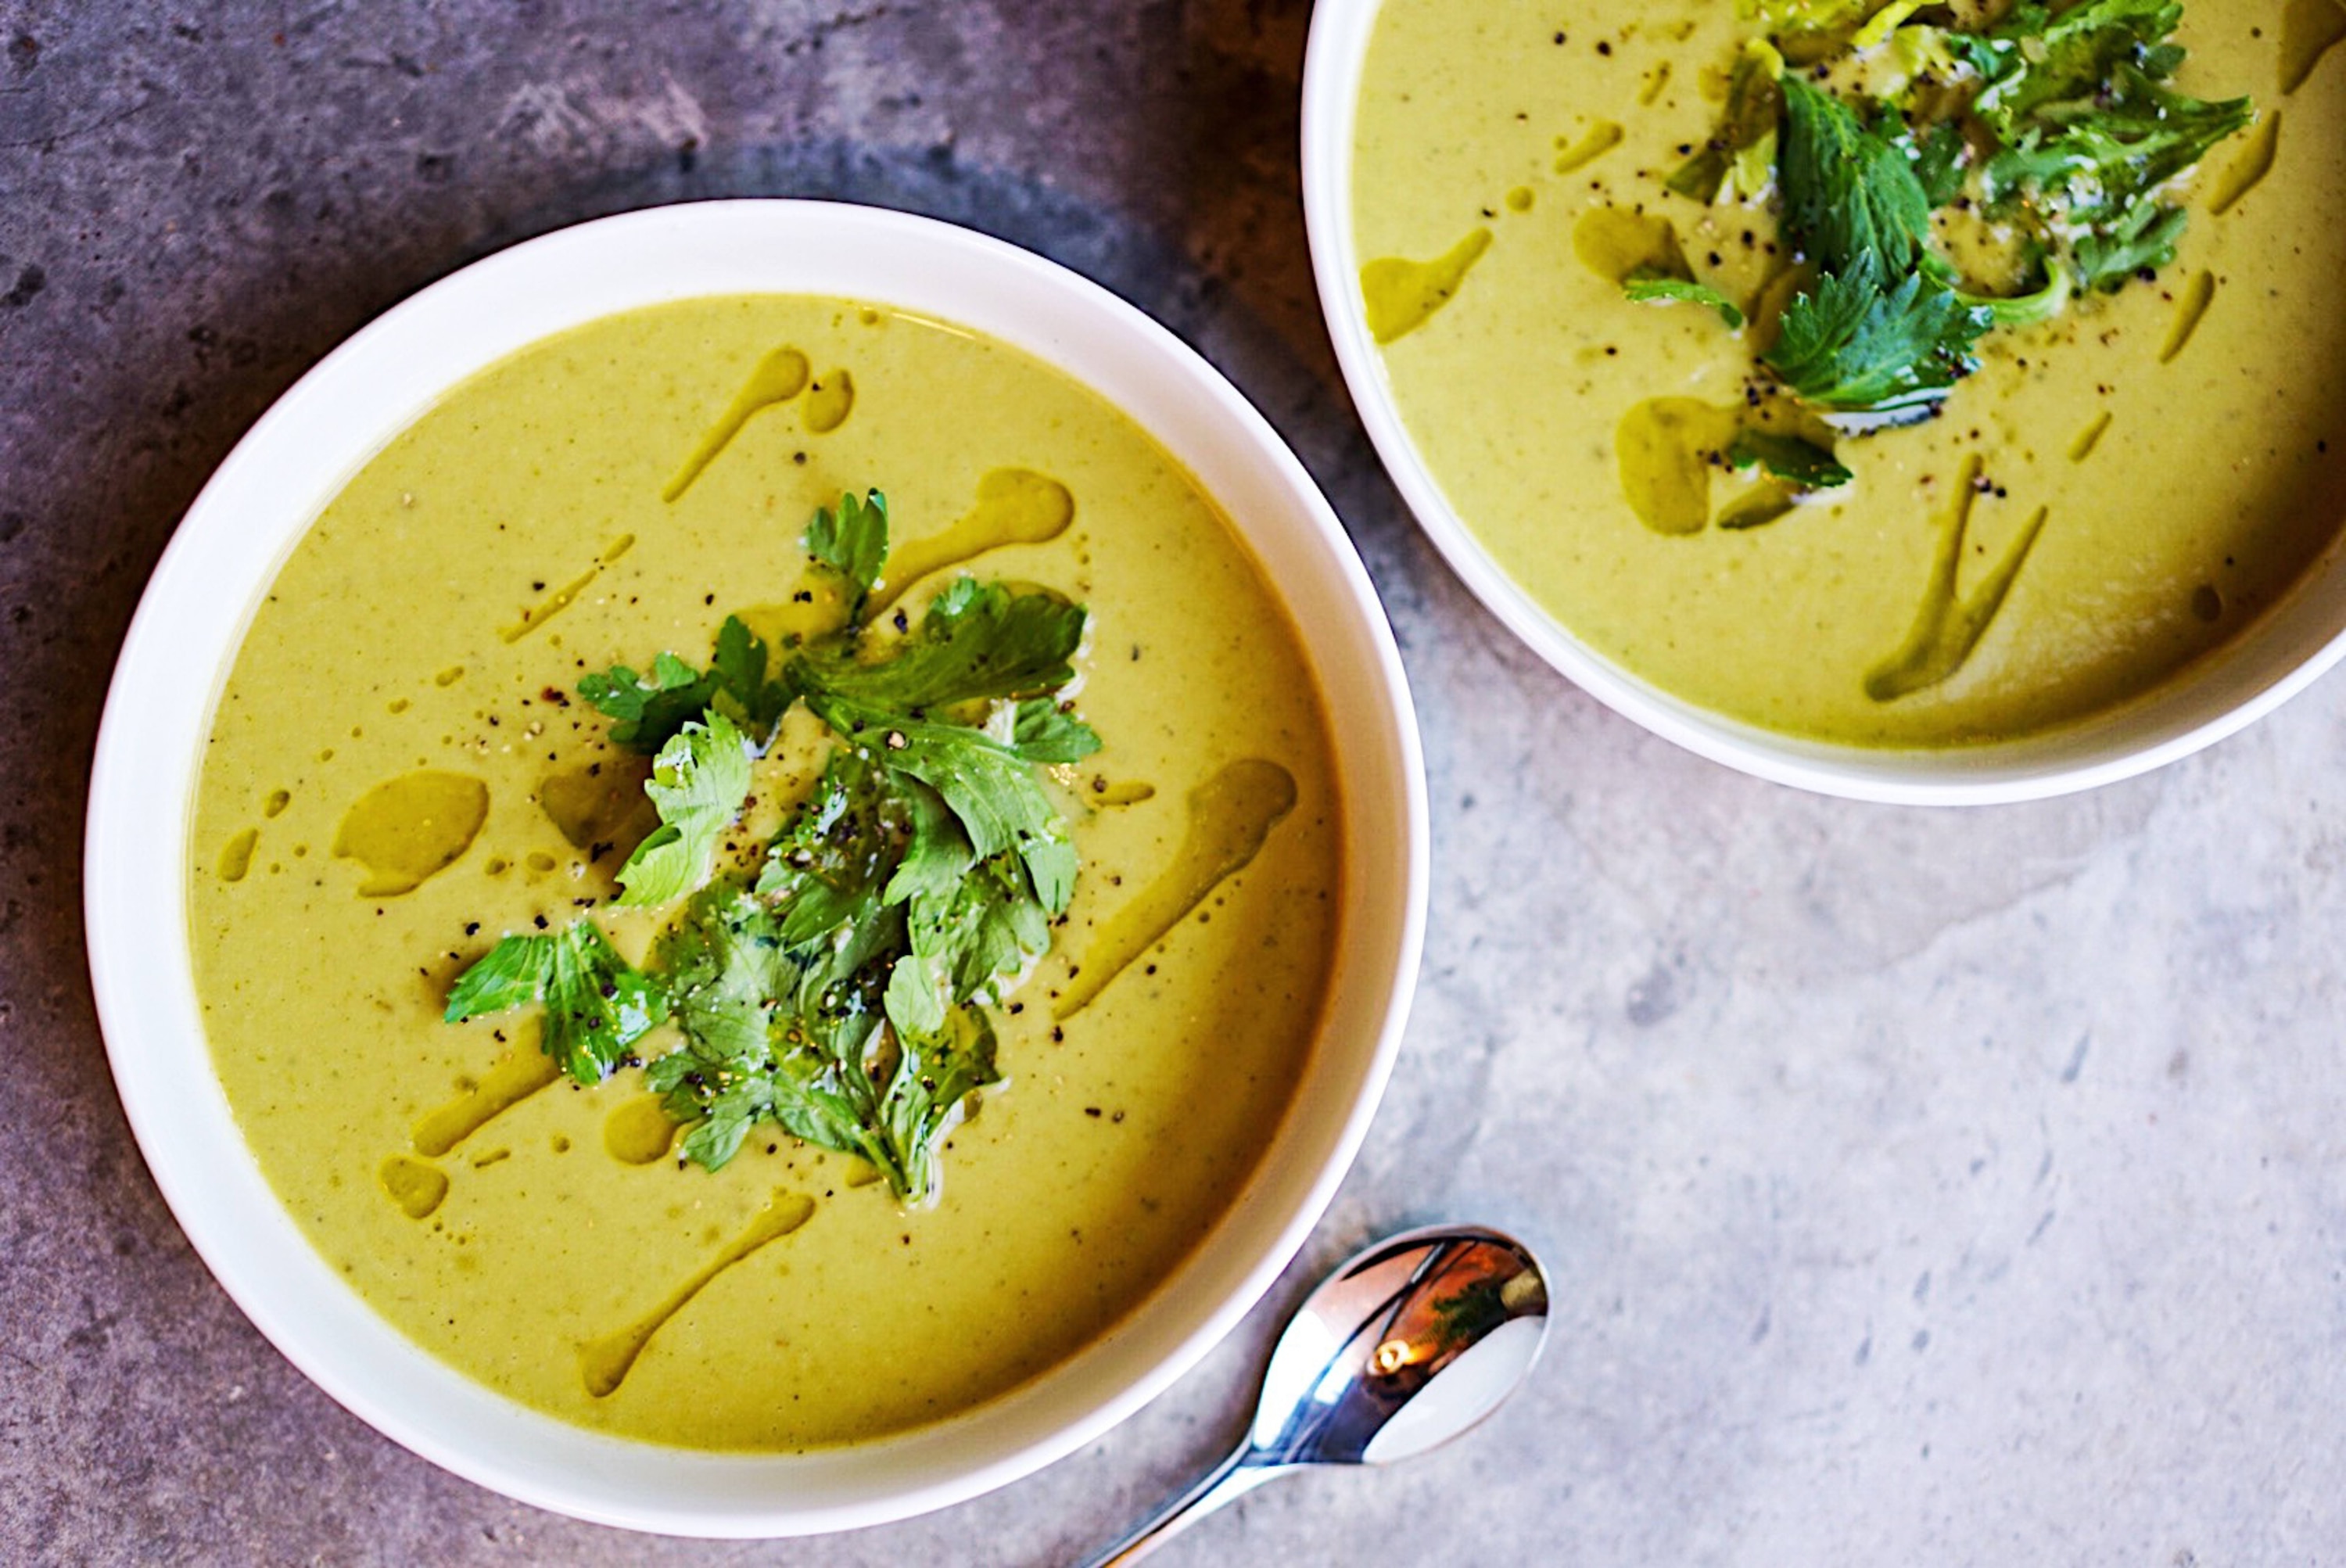 Cozy Up This Rainy Season With This Creamy Asparagus Soup